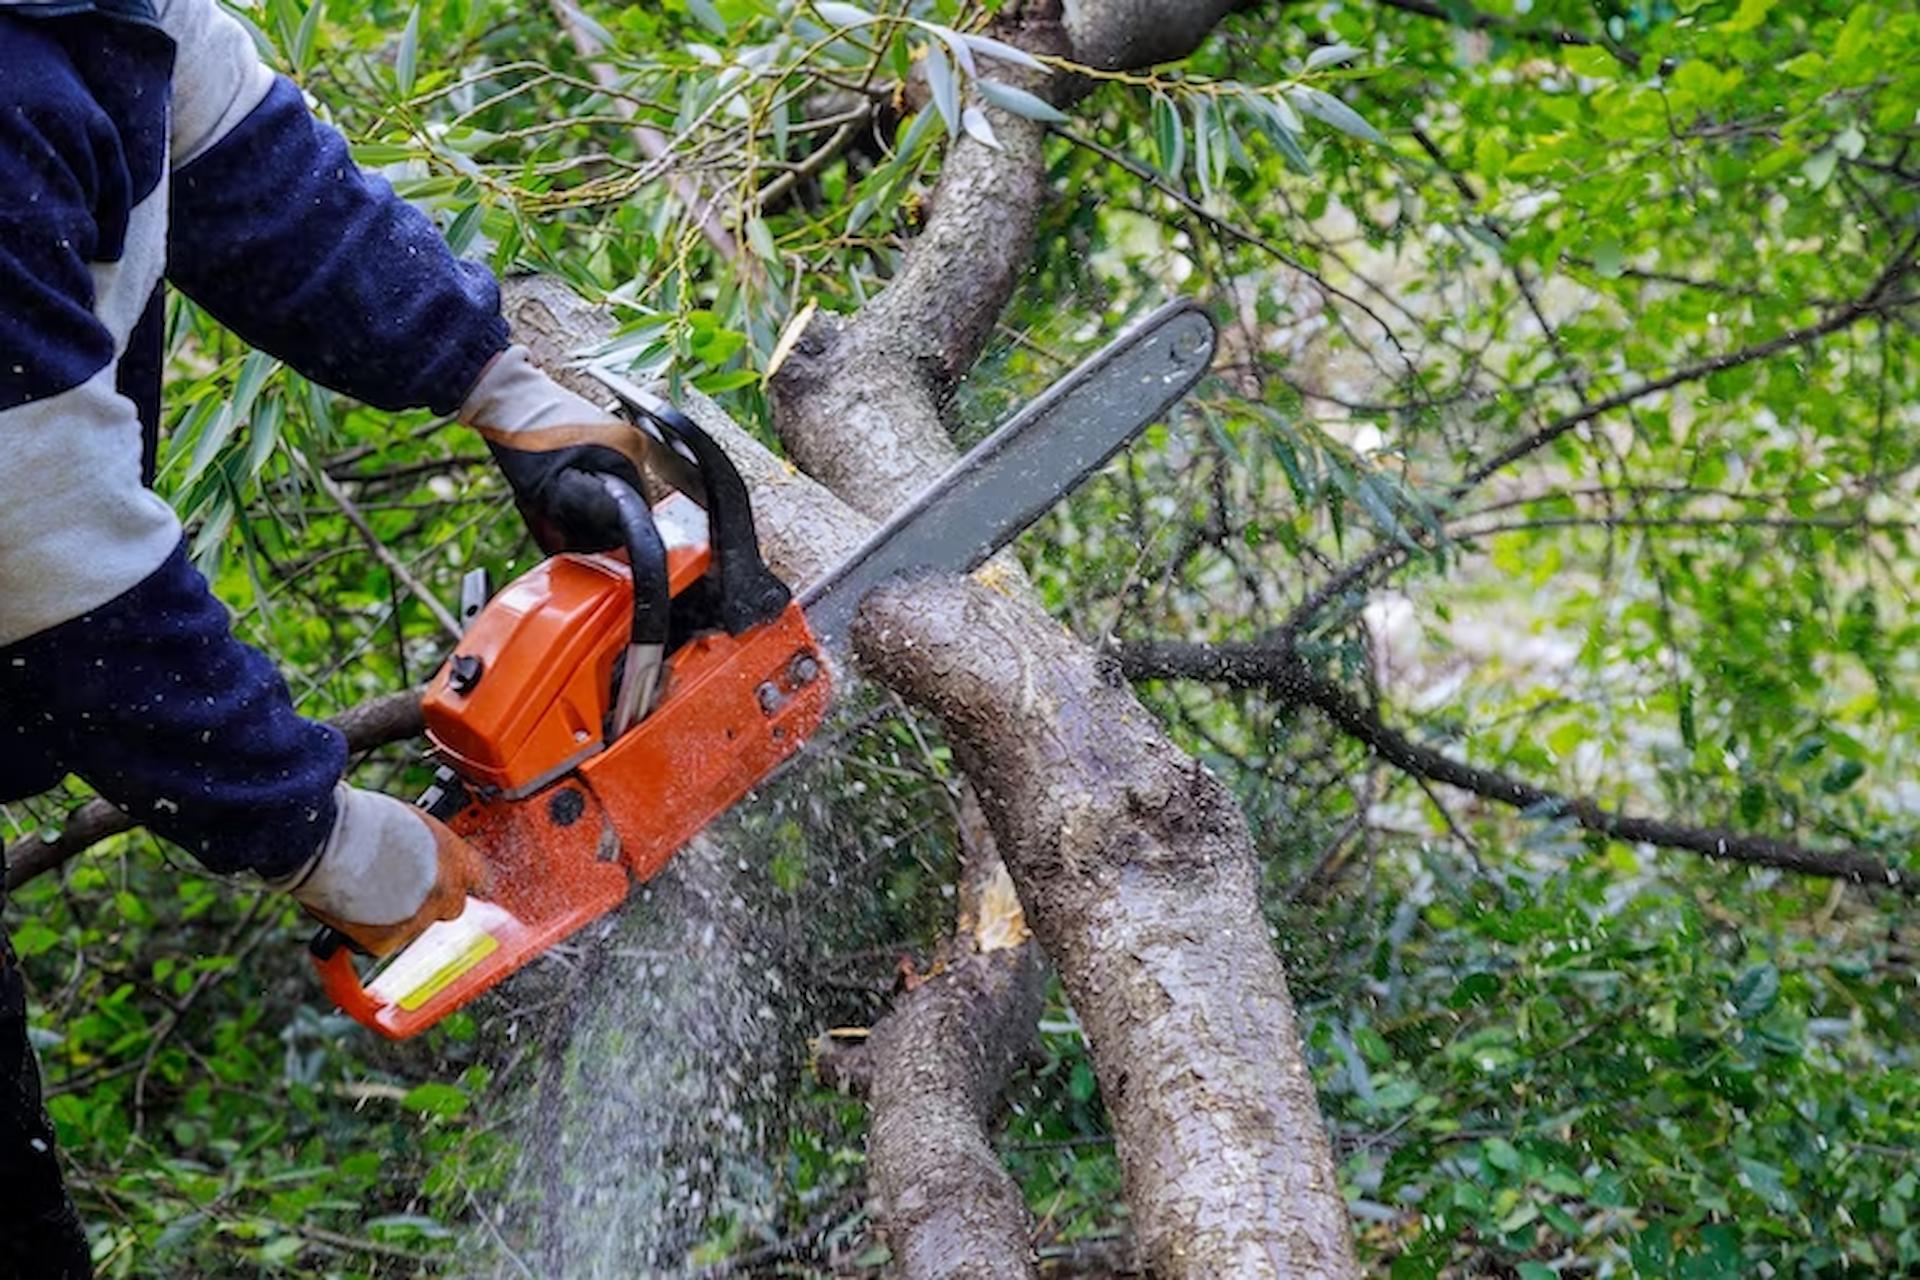 Expert Tree Surgery Tips for Maintaining Healthy Trees